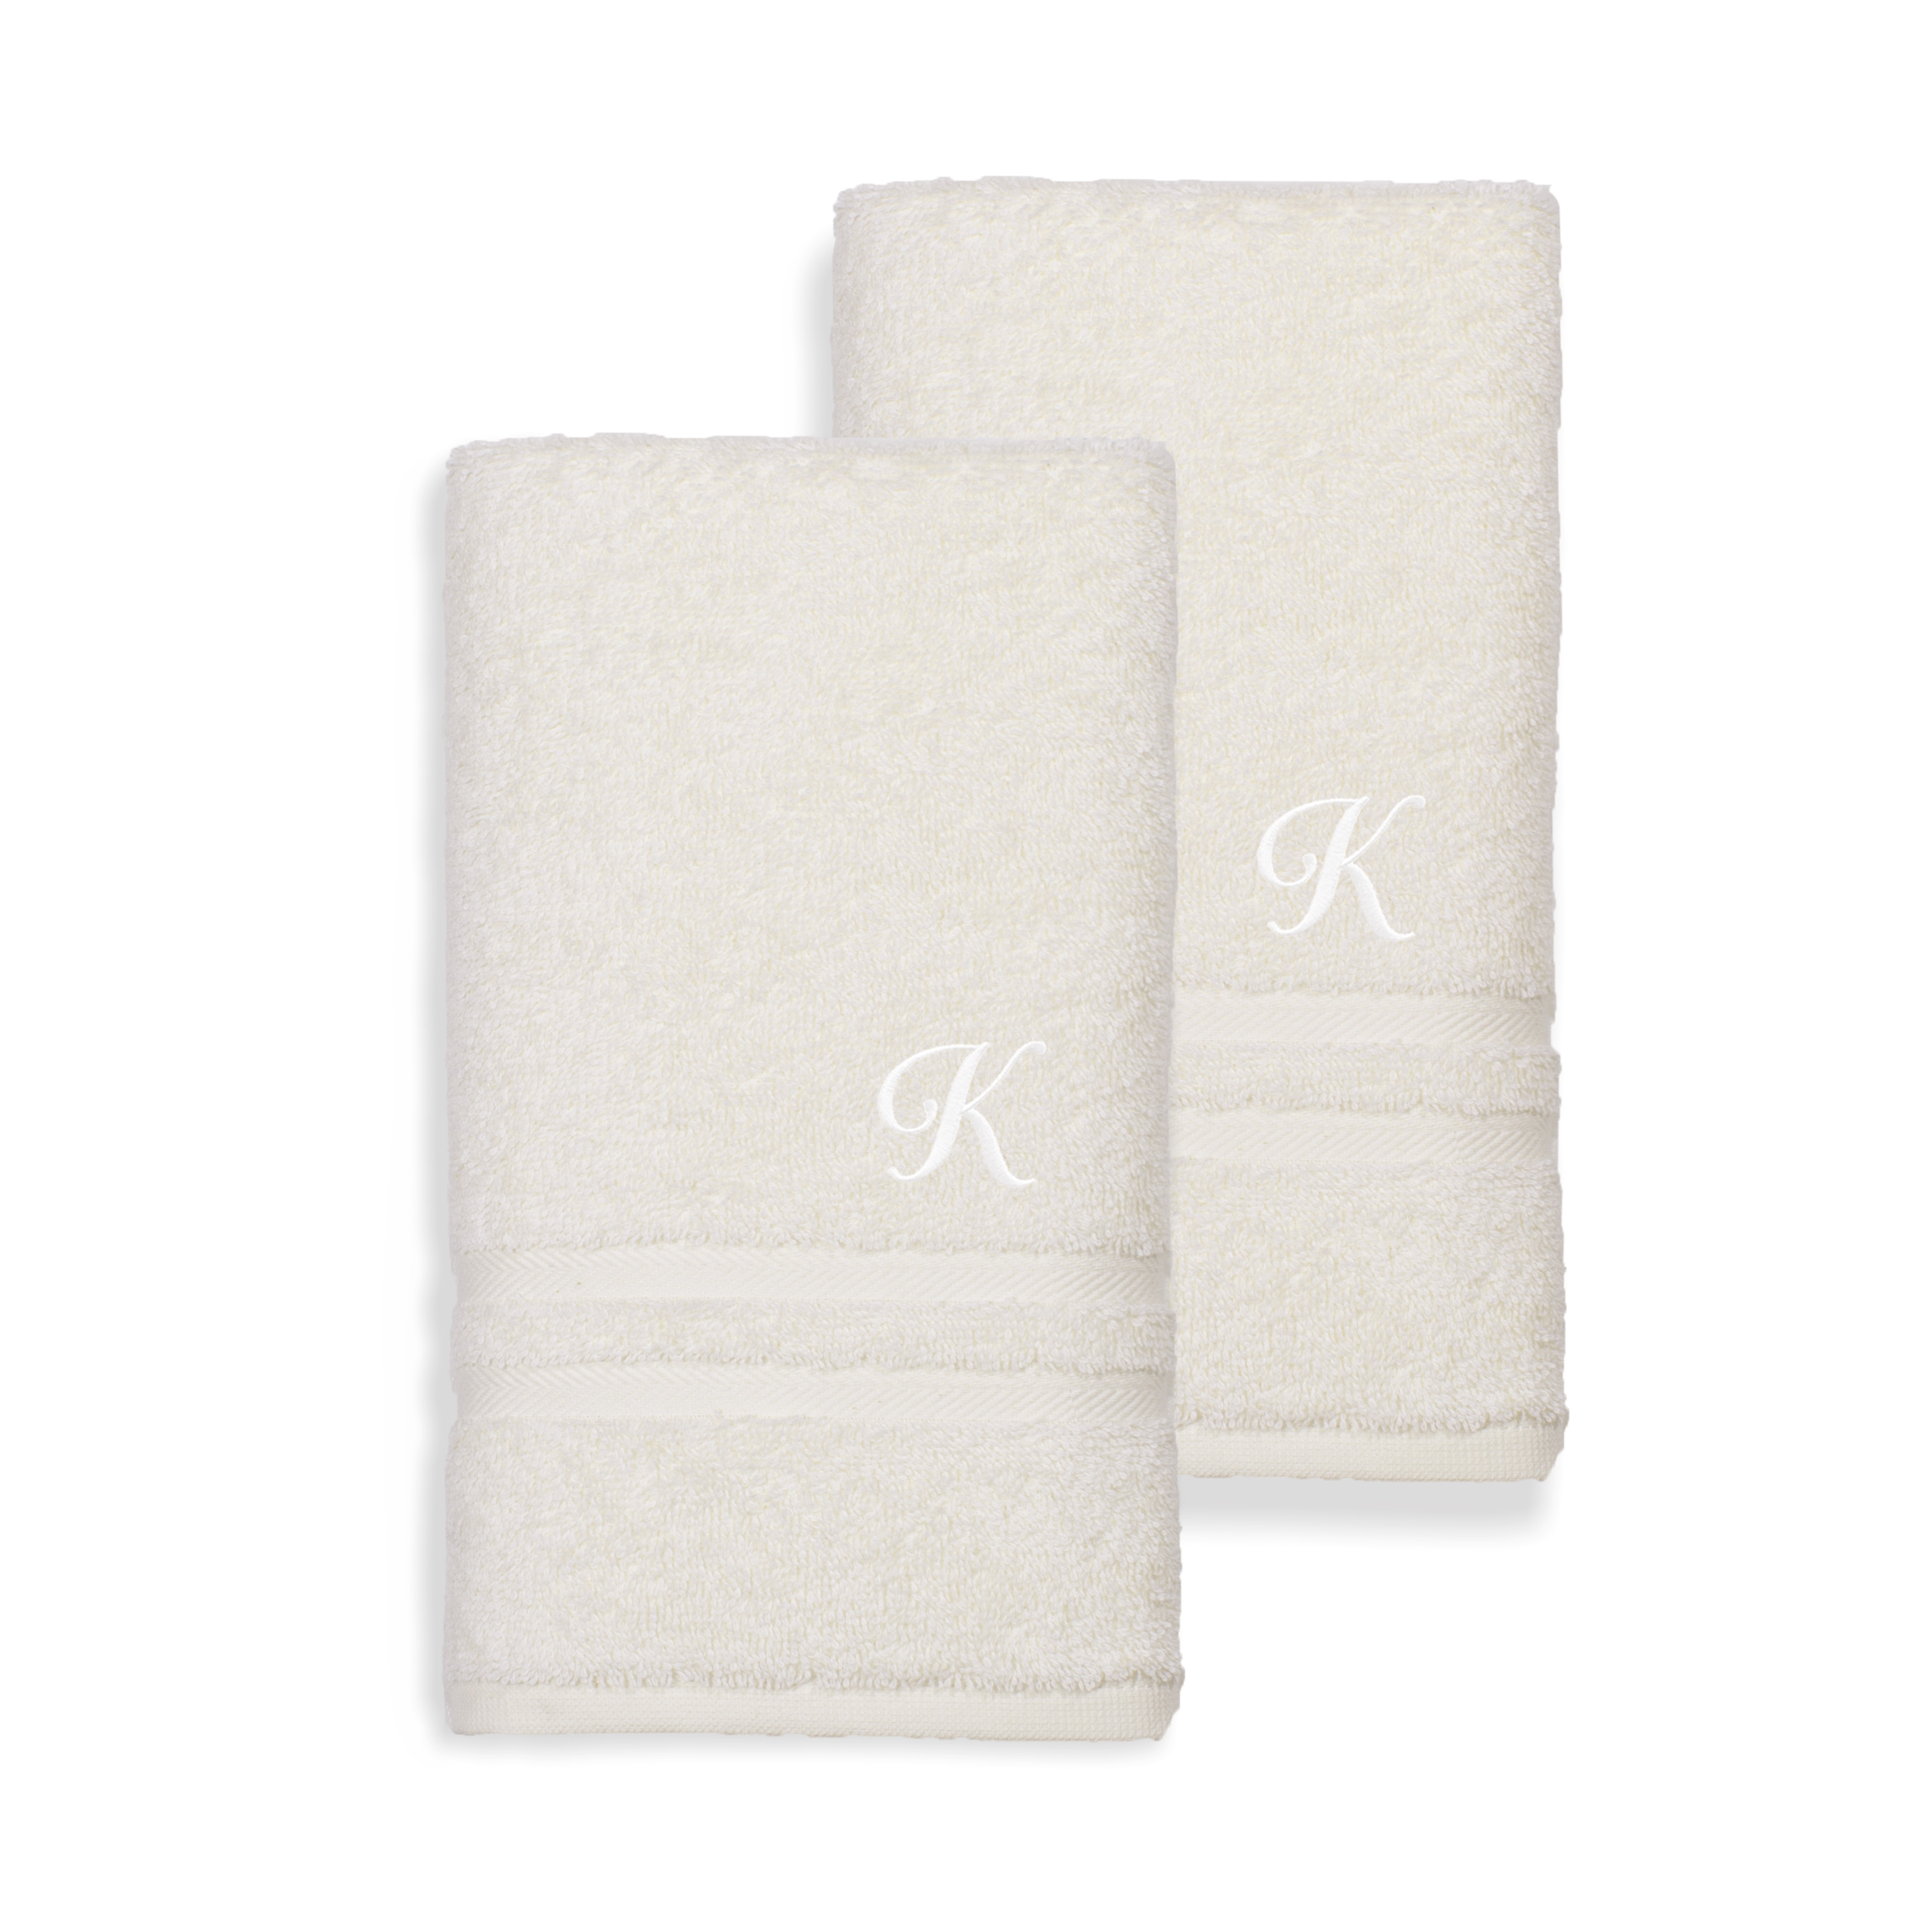 https://ak1.ostkcdn.com/images/products/12854013/Authentic-Hotel-and-Spa-Omni-Turkish-Cotton-Terry-Set-of-2-Cream-Hand-Towels-with-White-Script-Monogrammed-Initial-eca36618-3a78-49de-9432-40da427ec94e.jpg